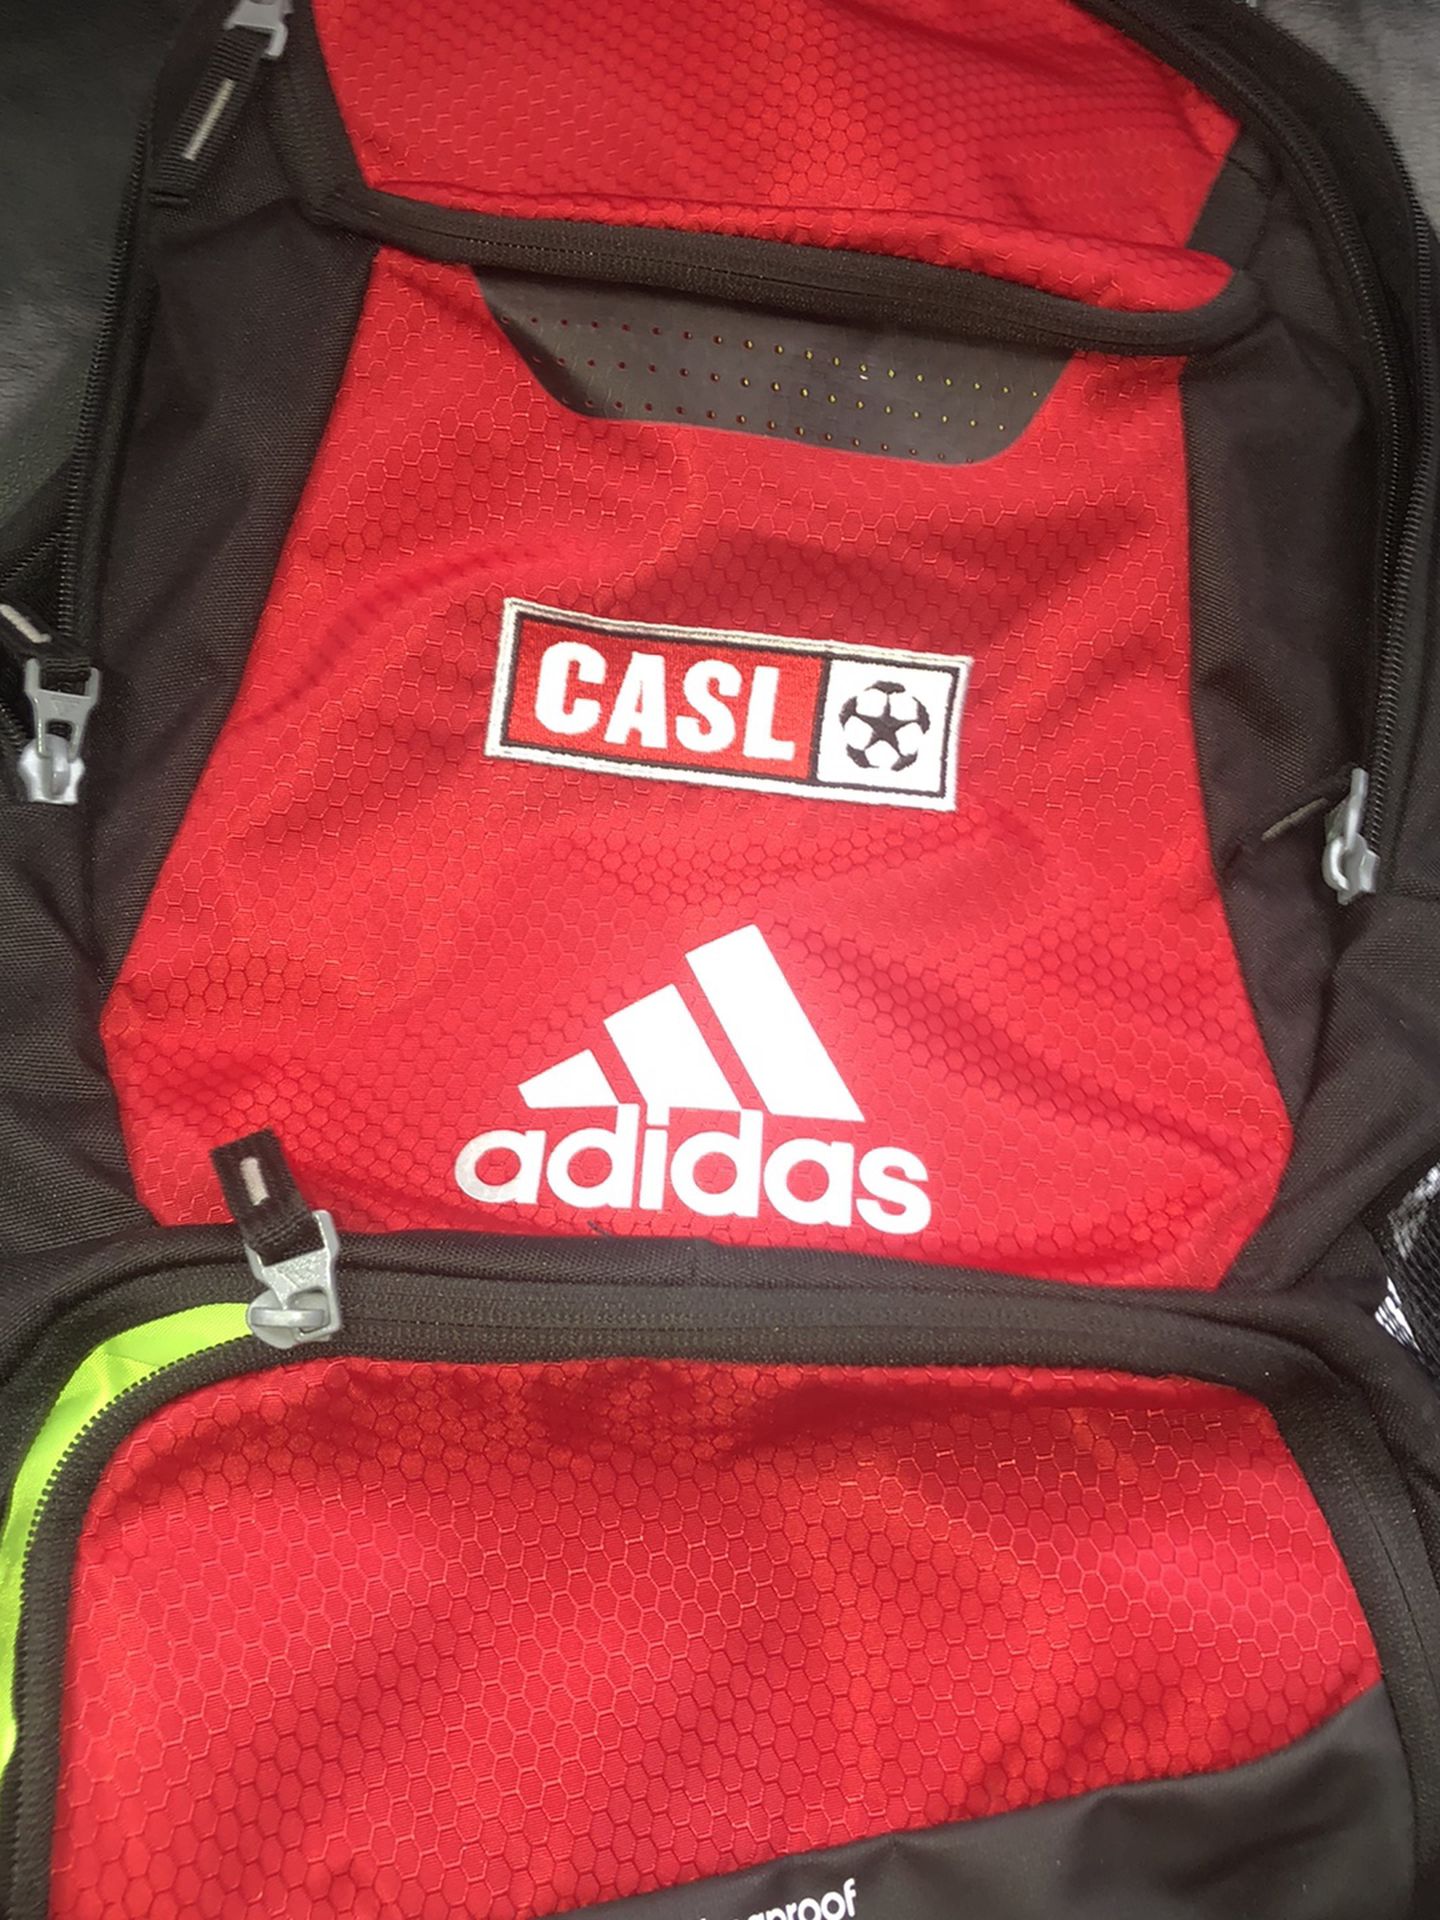 Red Casl Adidas Soccer Backpack